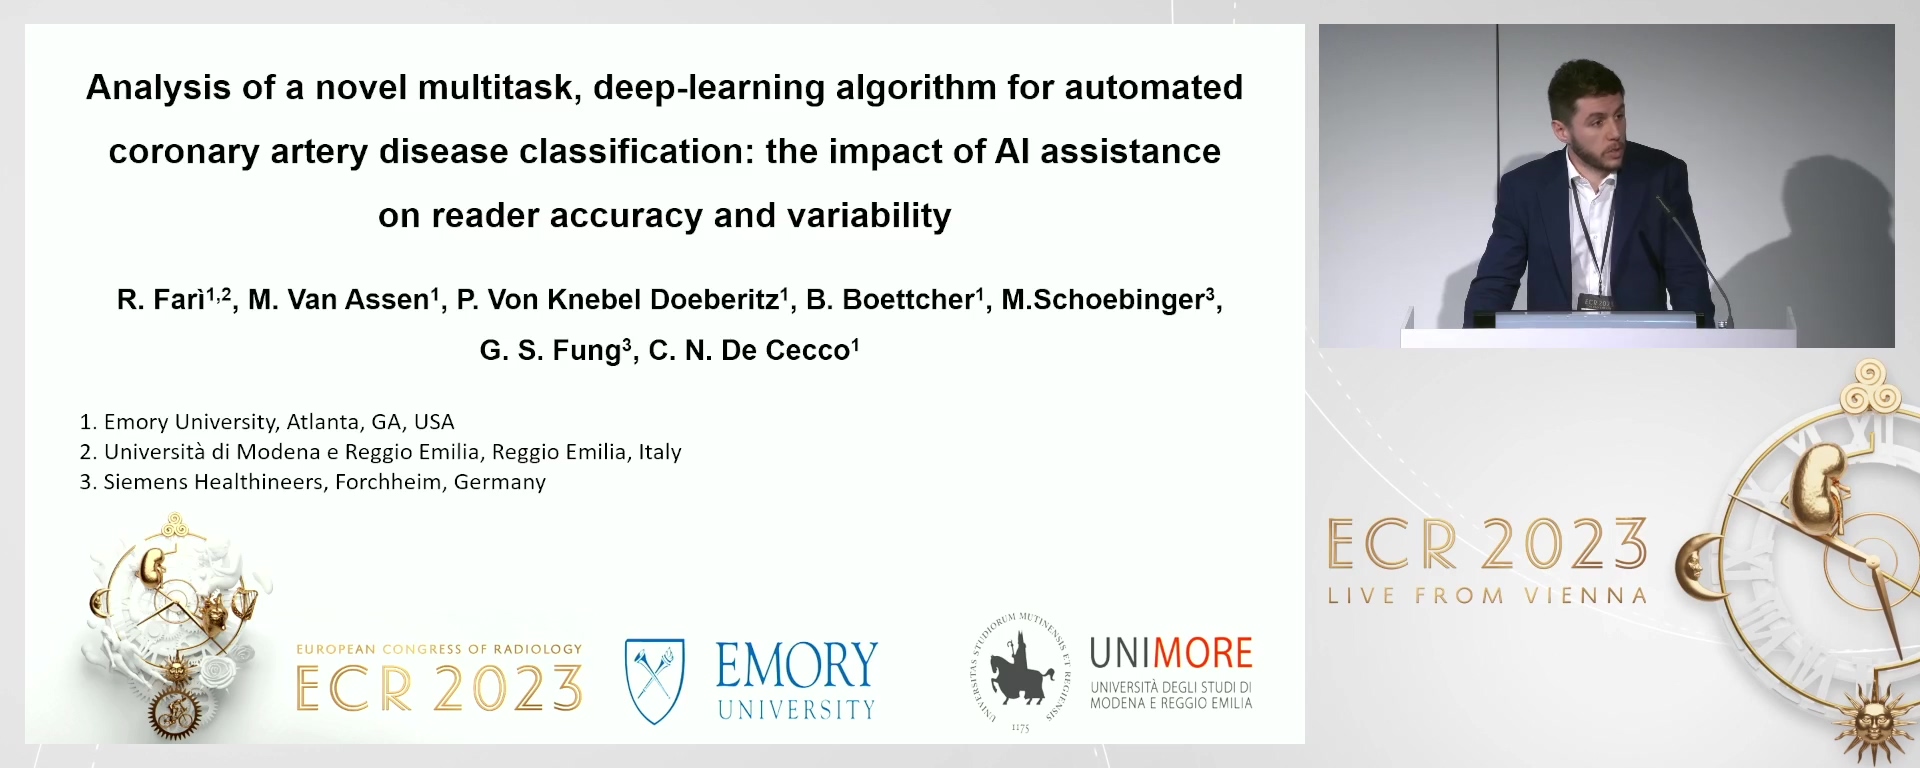 Analysis of a novel multitask, deep-learning algorithm for automated coronary artery disease classification: the impact of AI assistance on reader accuracy and variability - Roberto Farì, Modena / IT